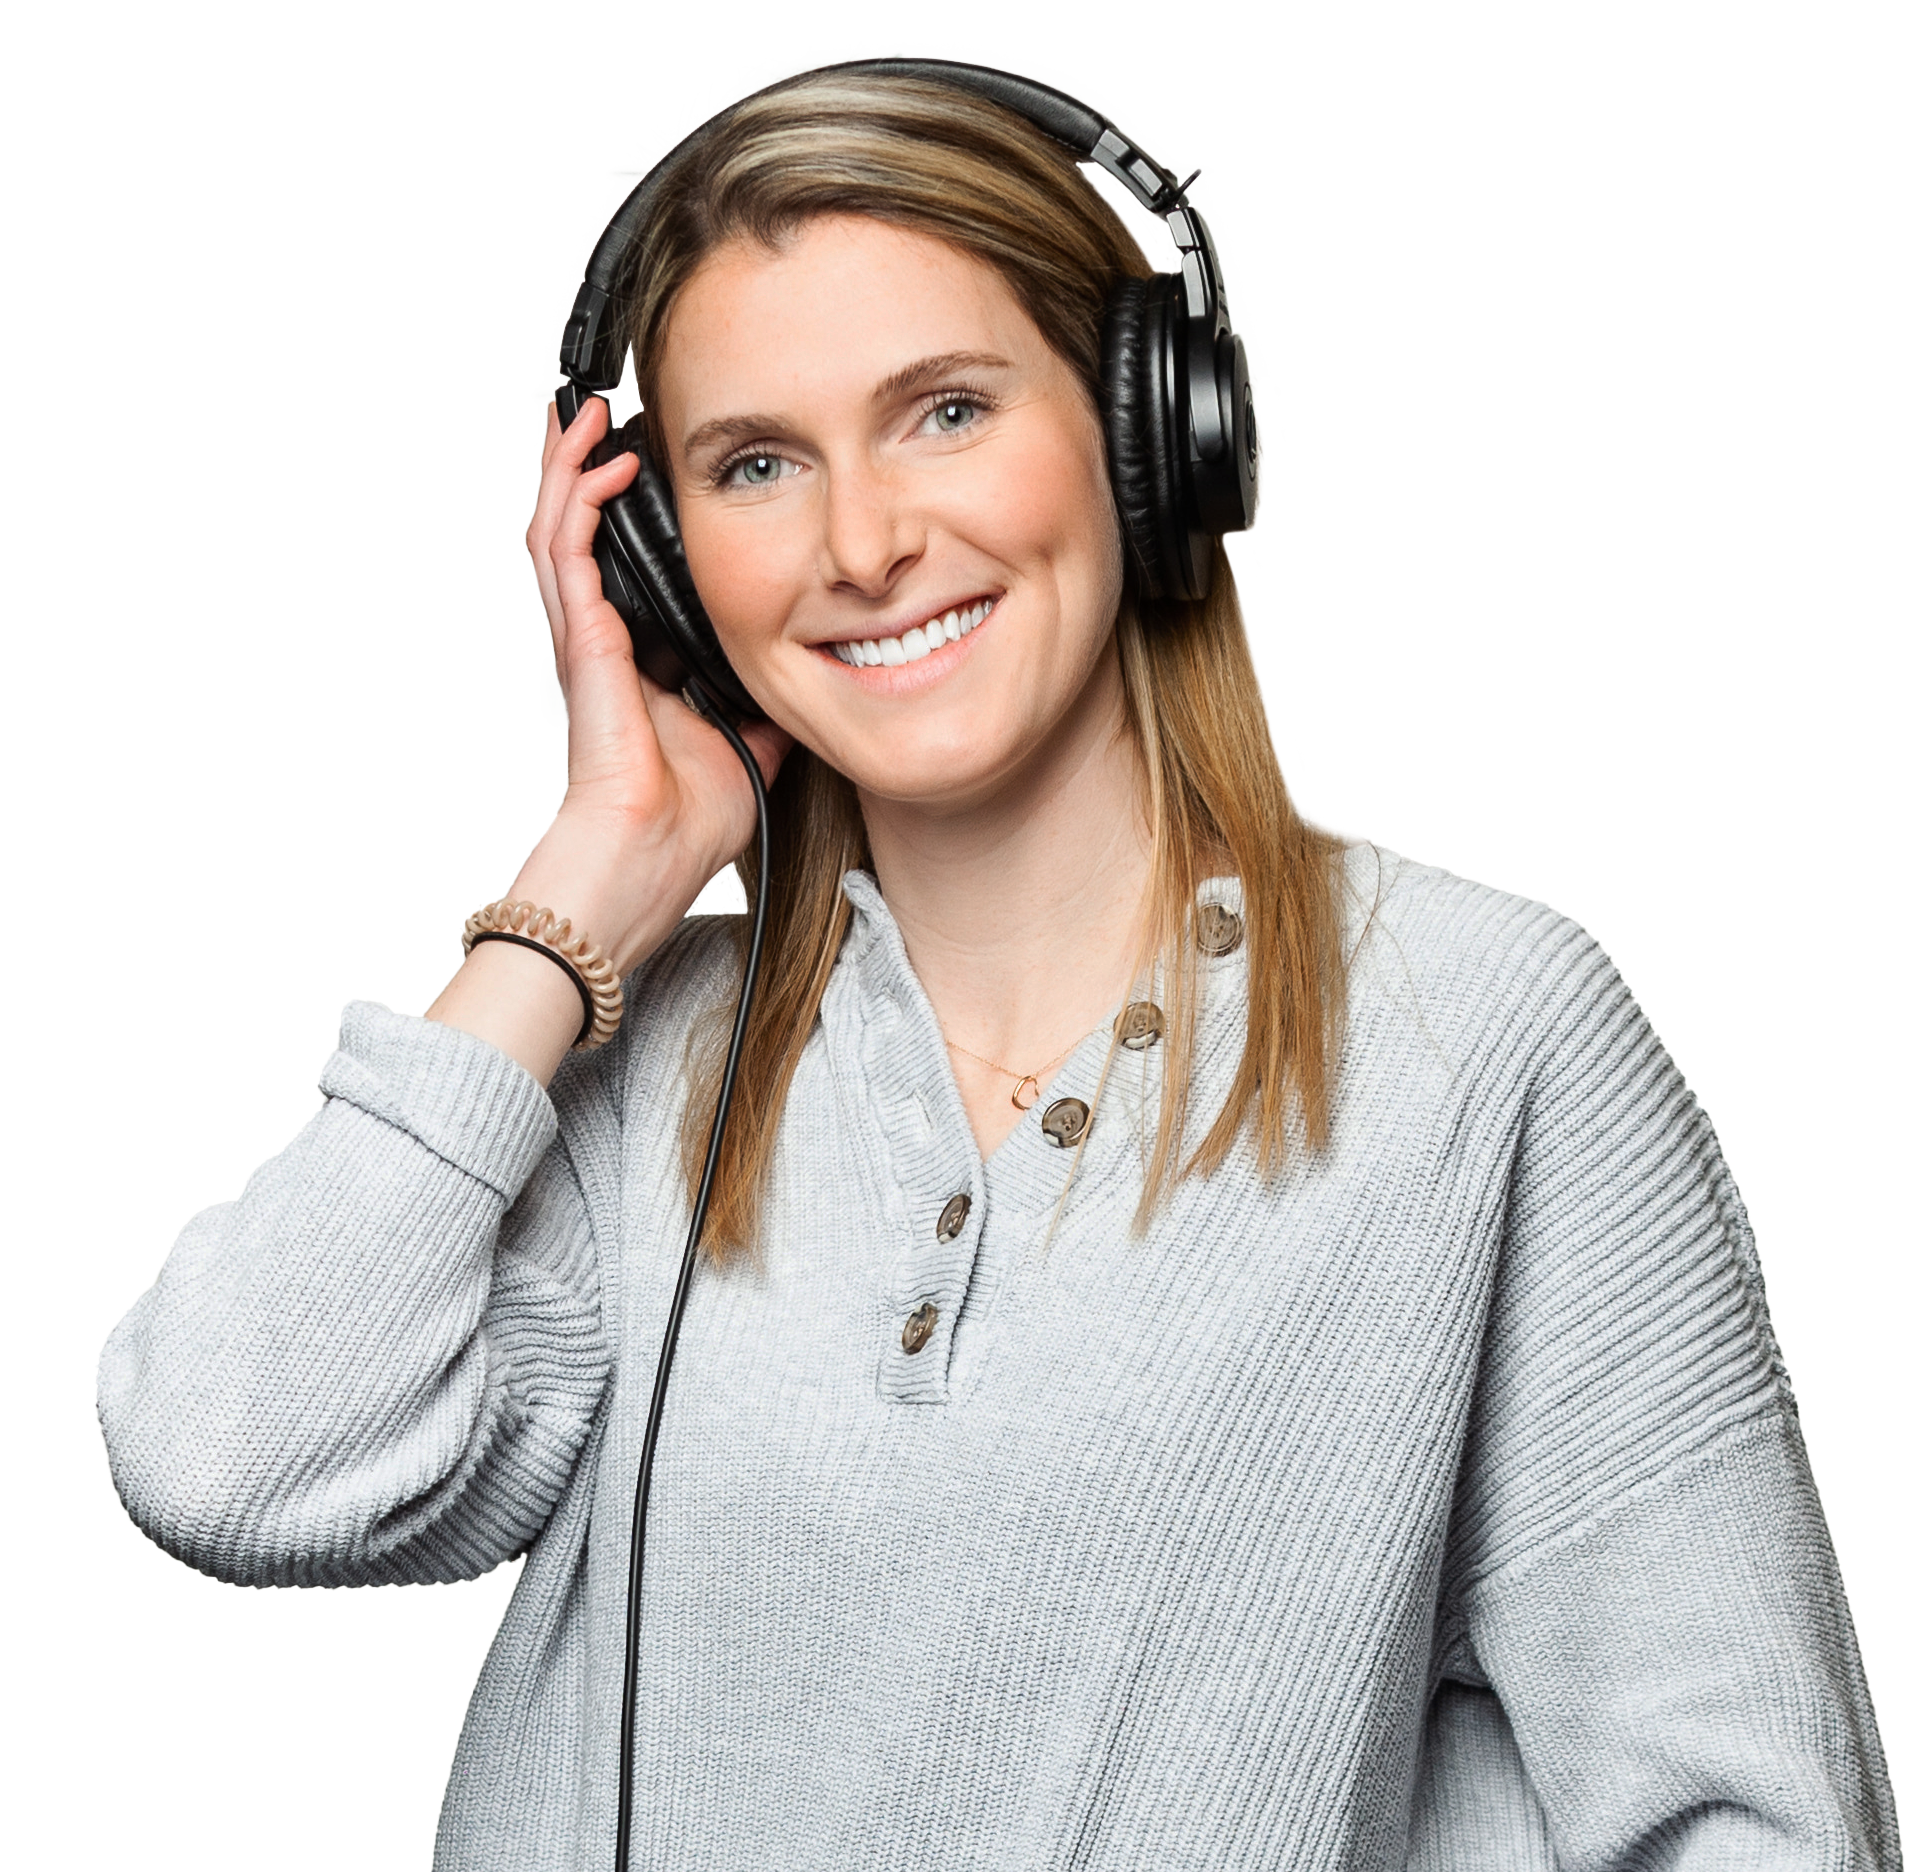 A female voice actor smiling and wearing headphones.